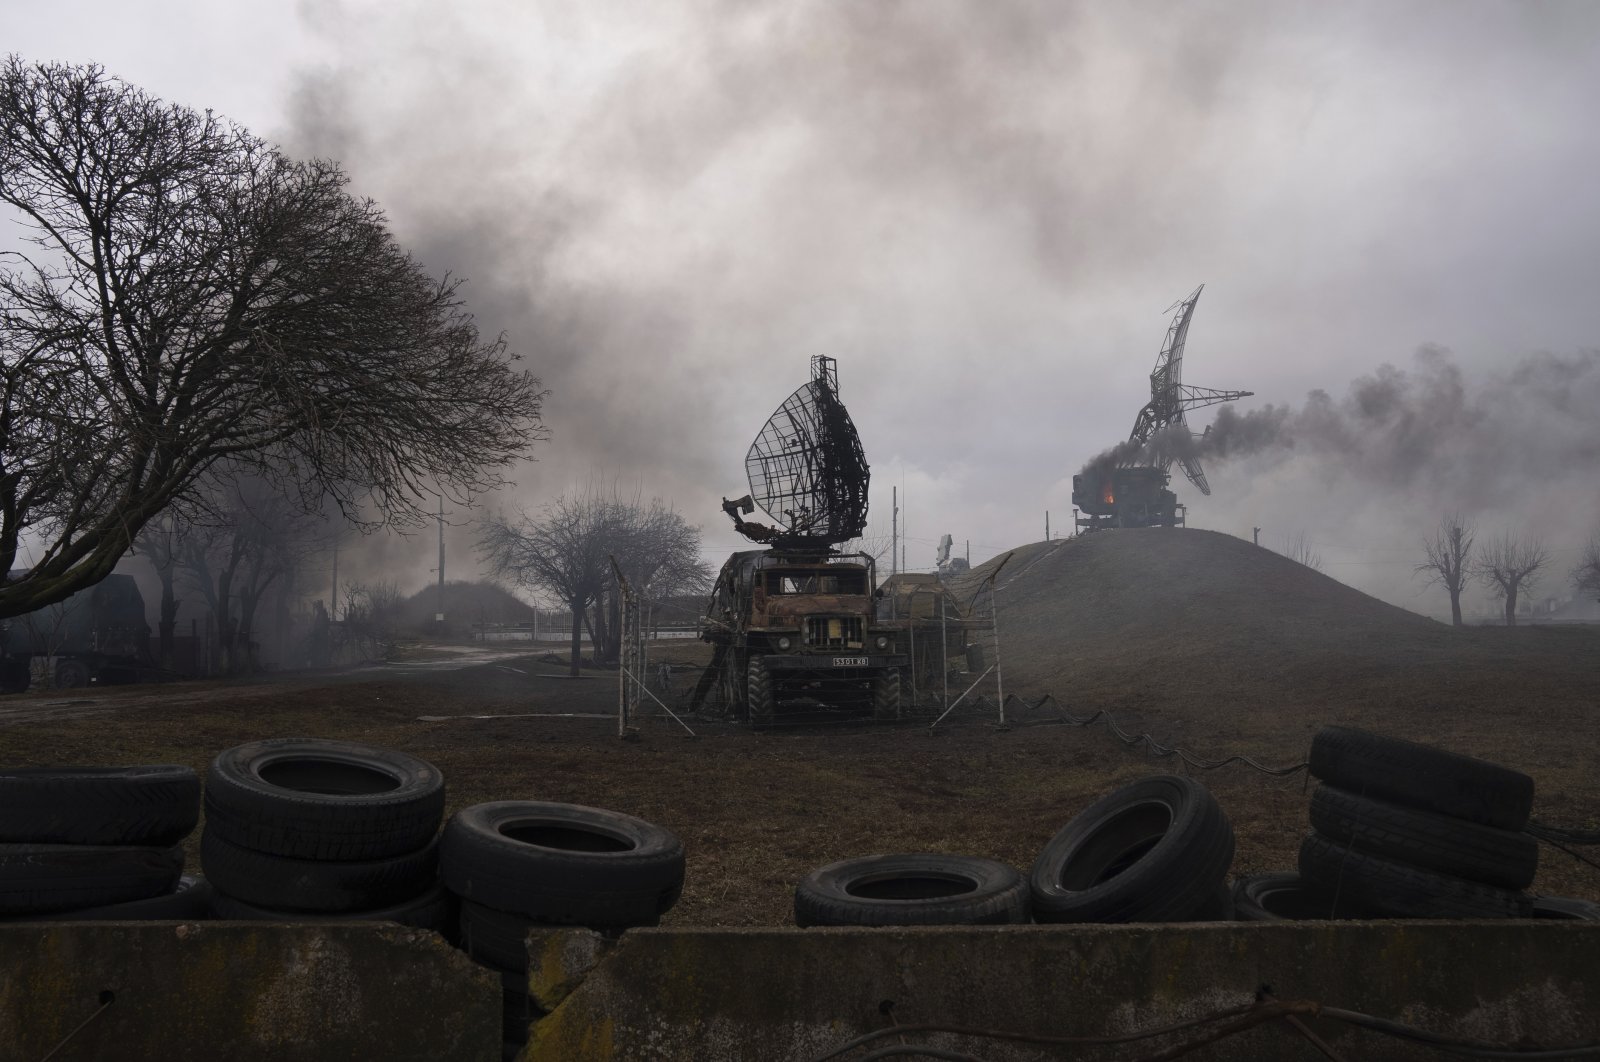 Smoke rises from an air defence base in the aftermath of an apparent Russian strike in Mariupol, Ukraine, Feb. 24, 2022. (AP Photo)